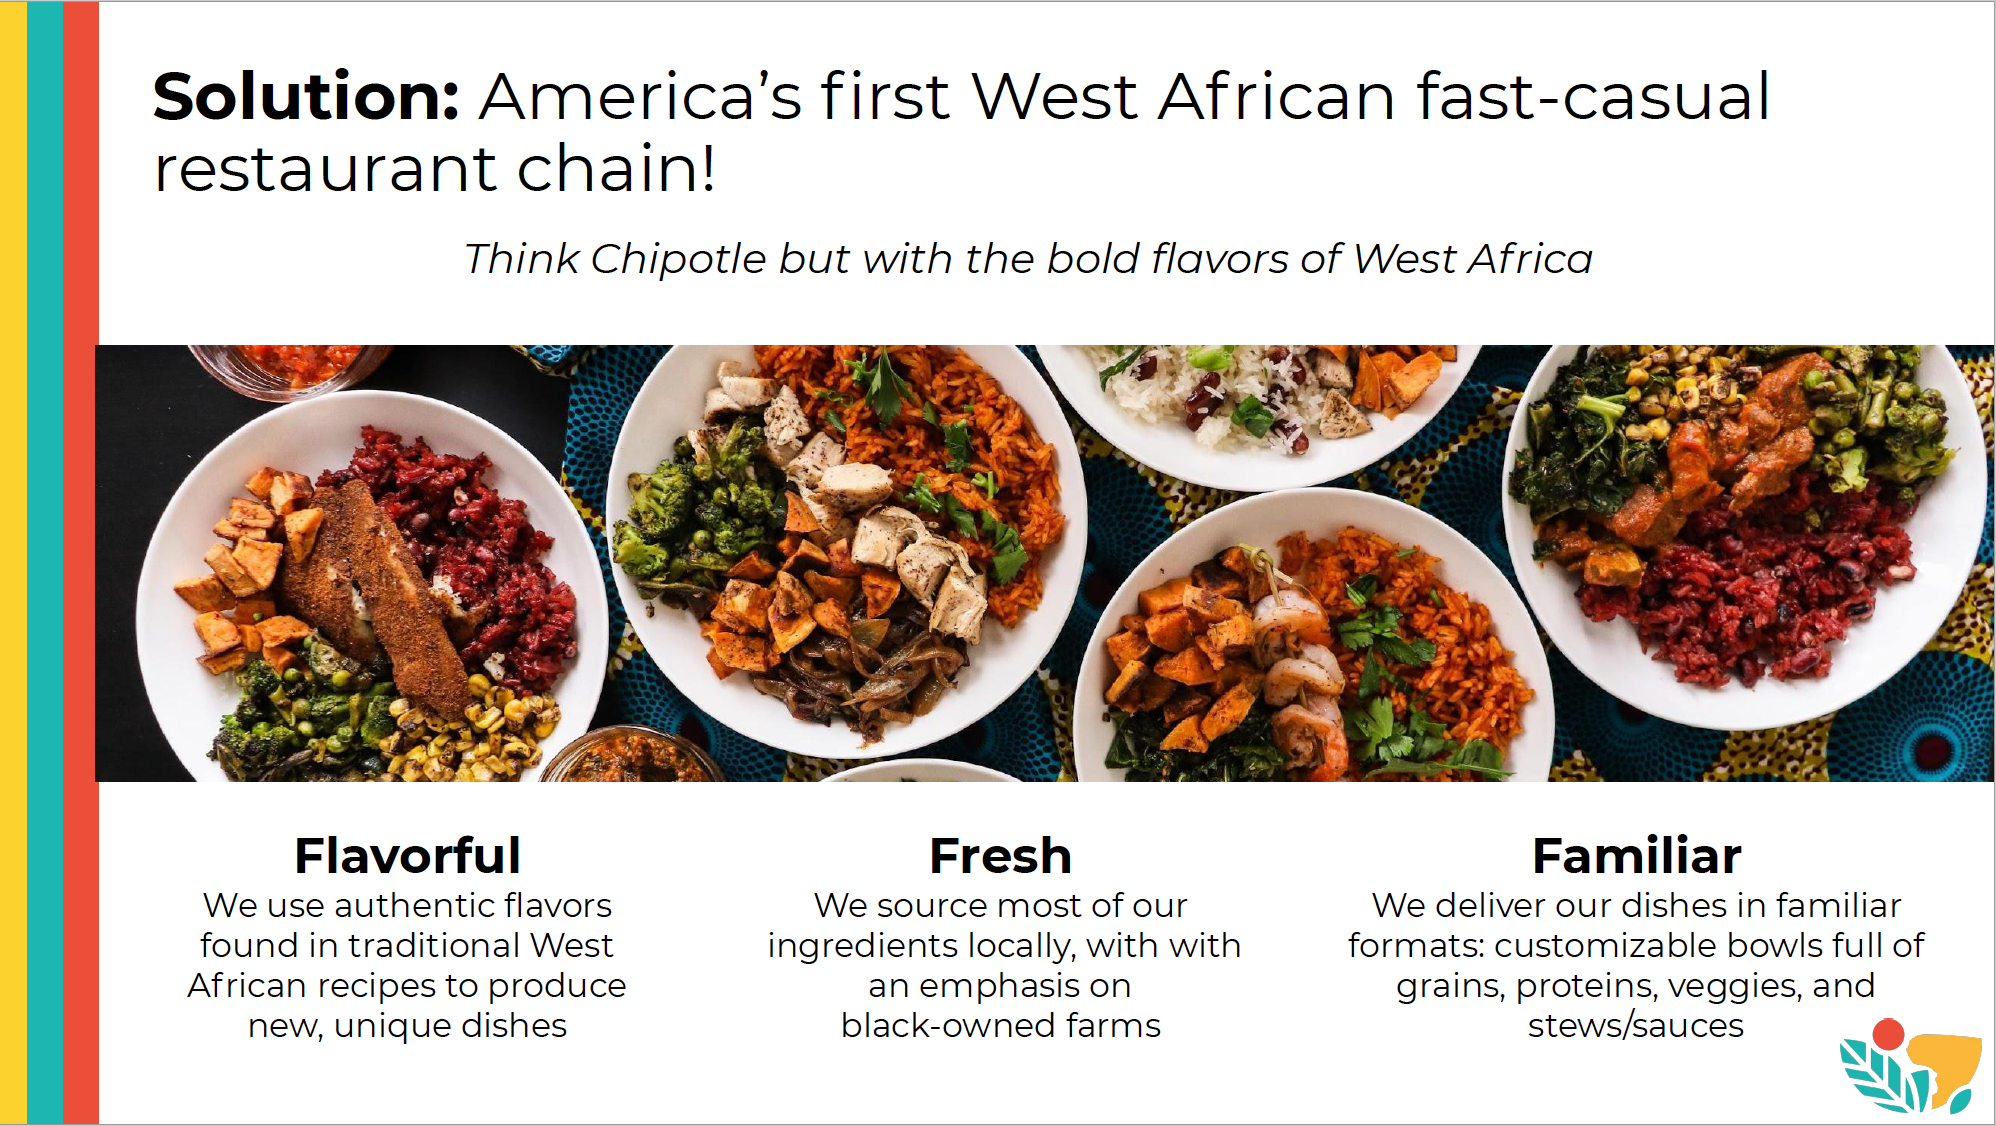 Fudena proposes a solution that makes West African food more accessible to the U.S.